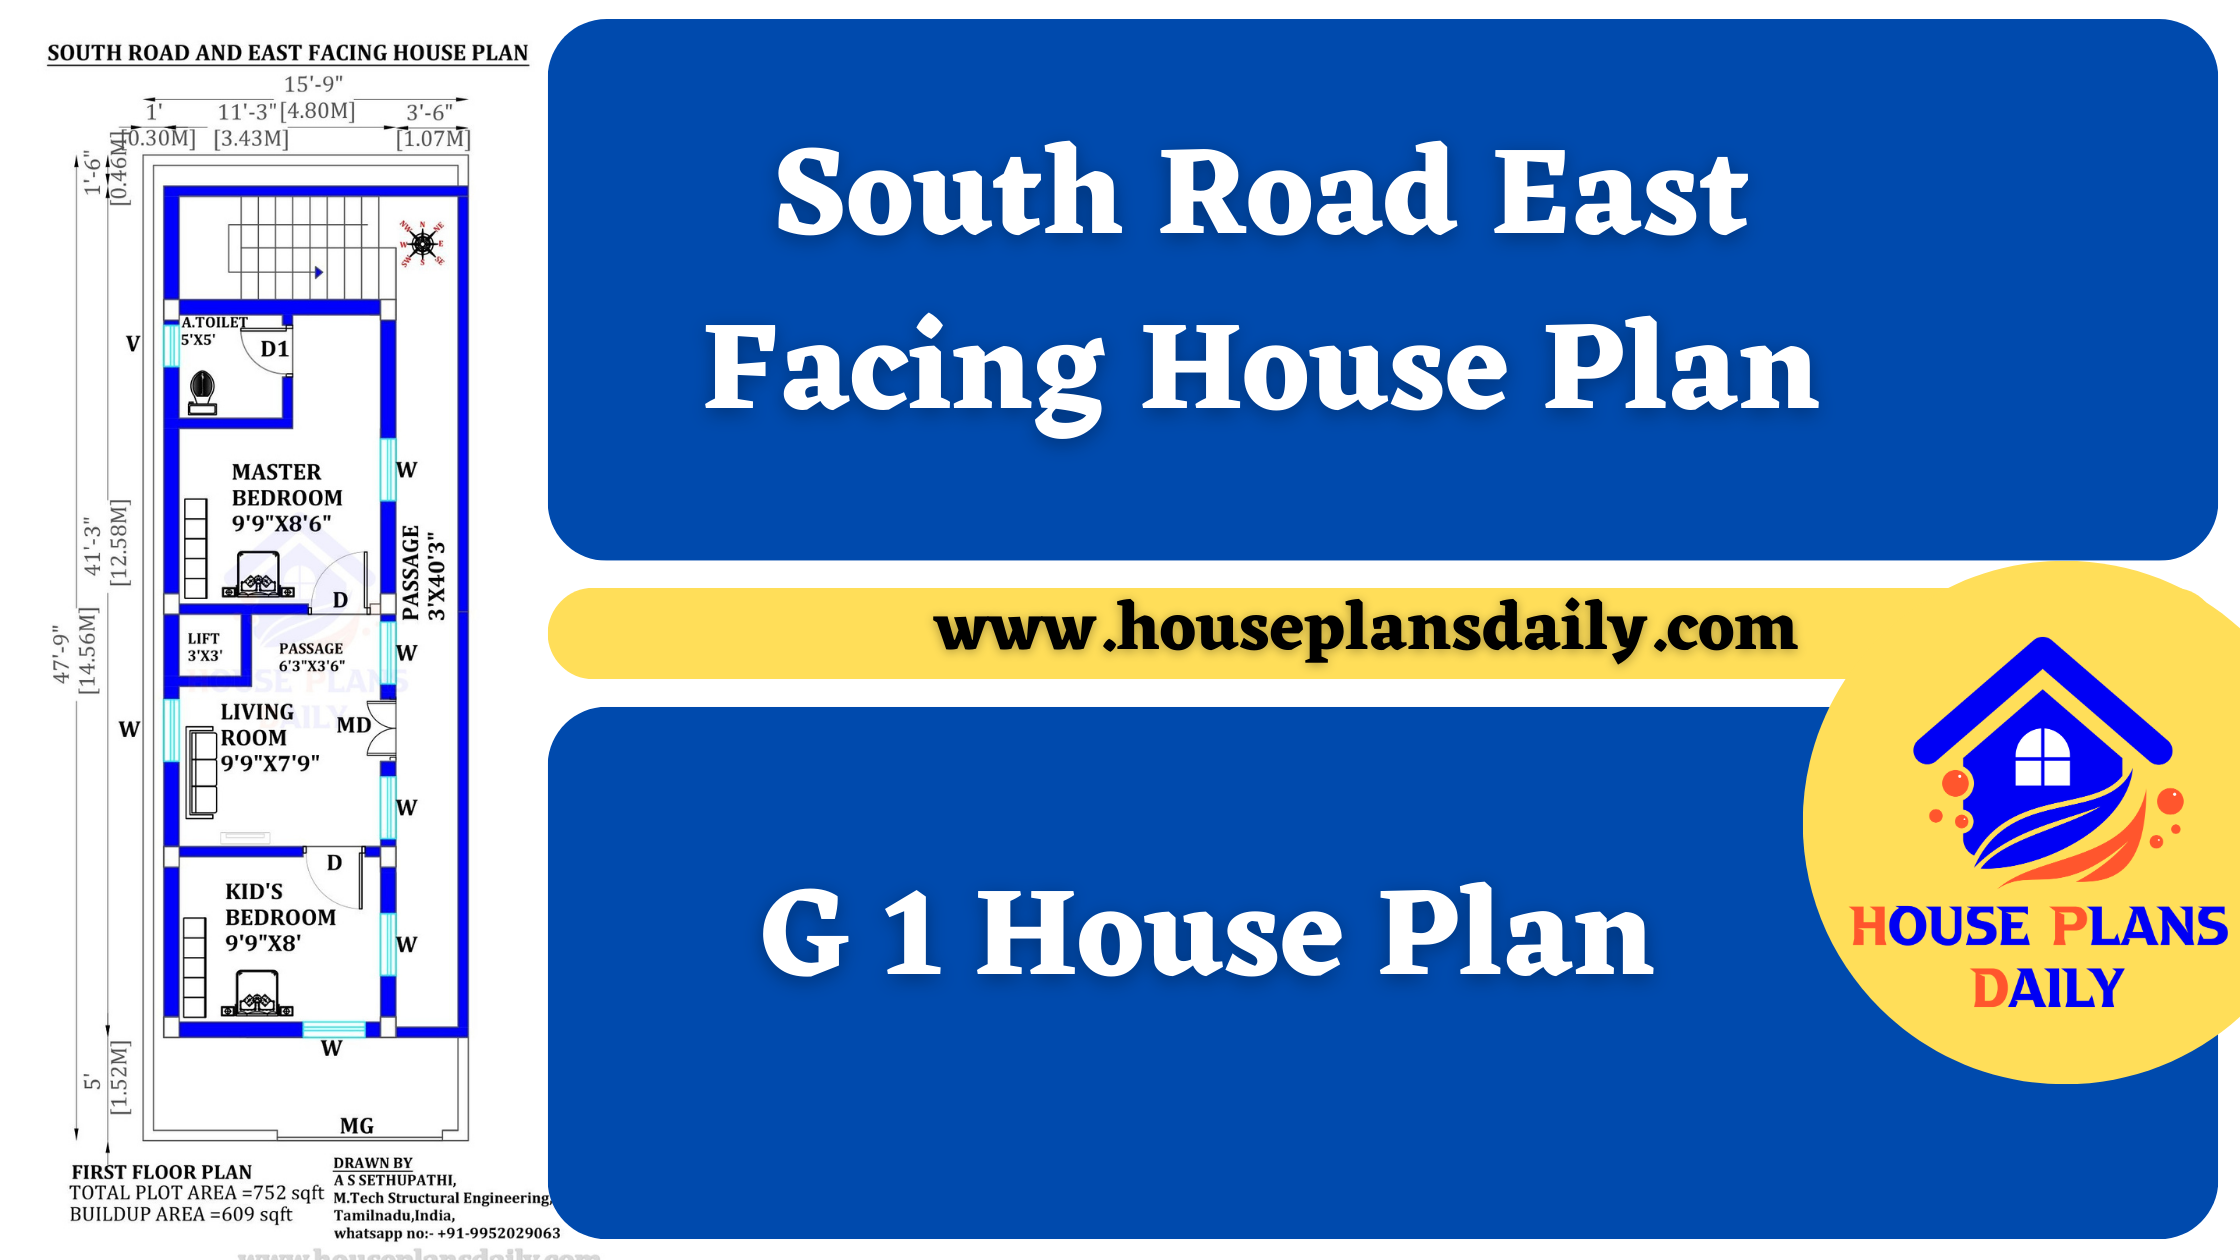 South Road East Facing House Plan | G 1 House Plan